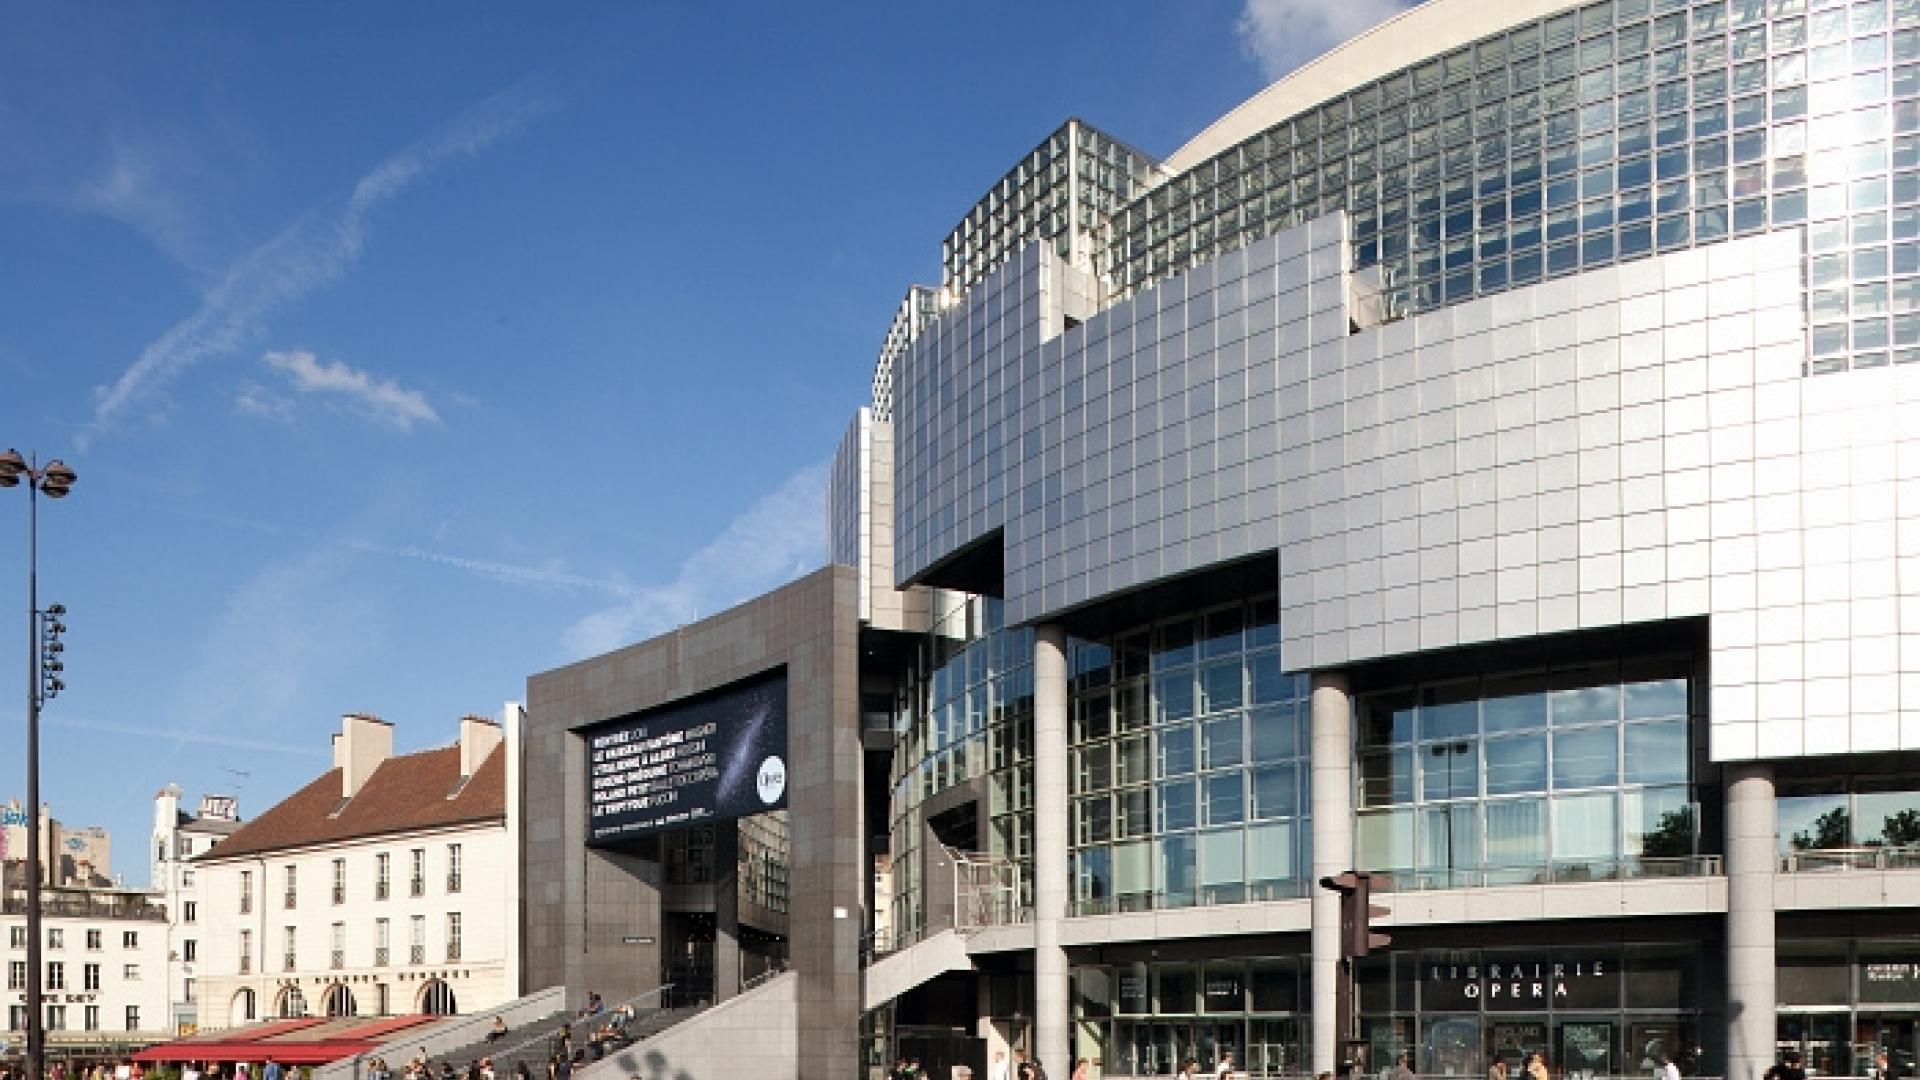 Spend an unforgettable night at the Opera Bastille